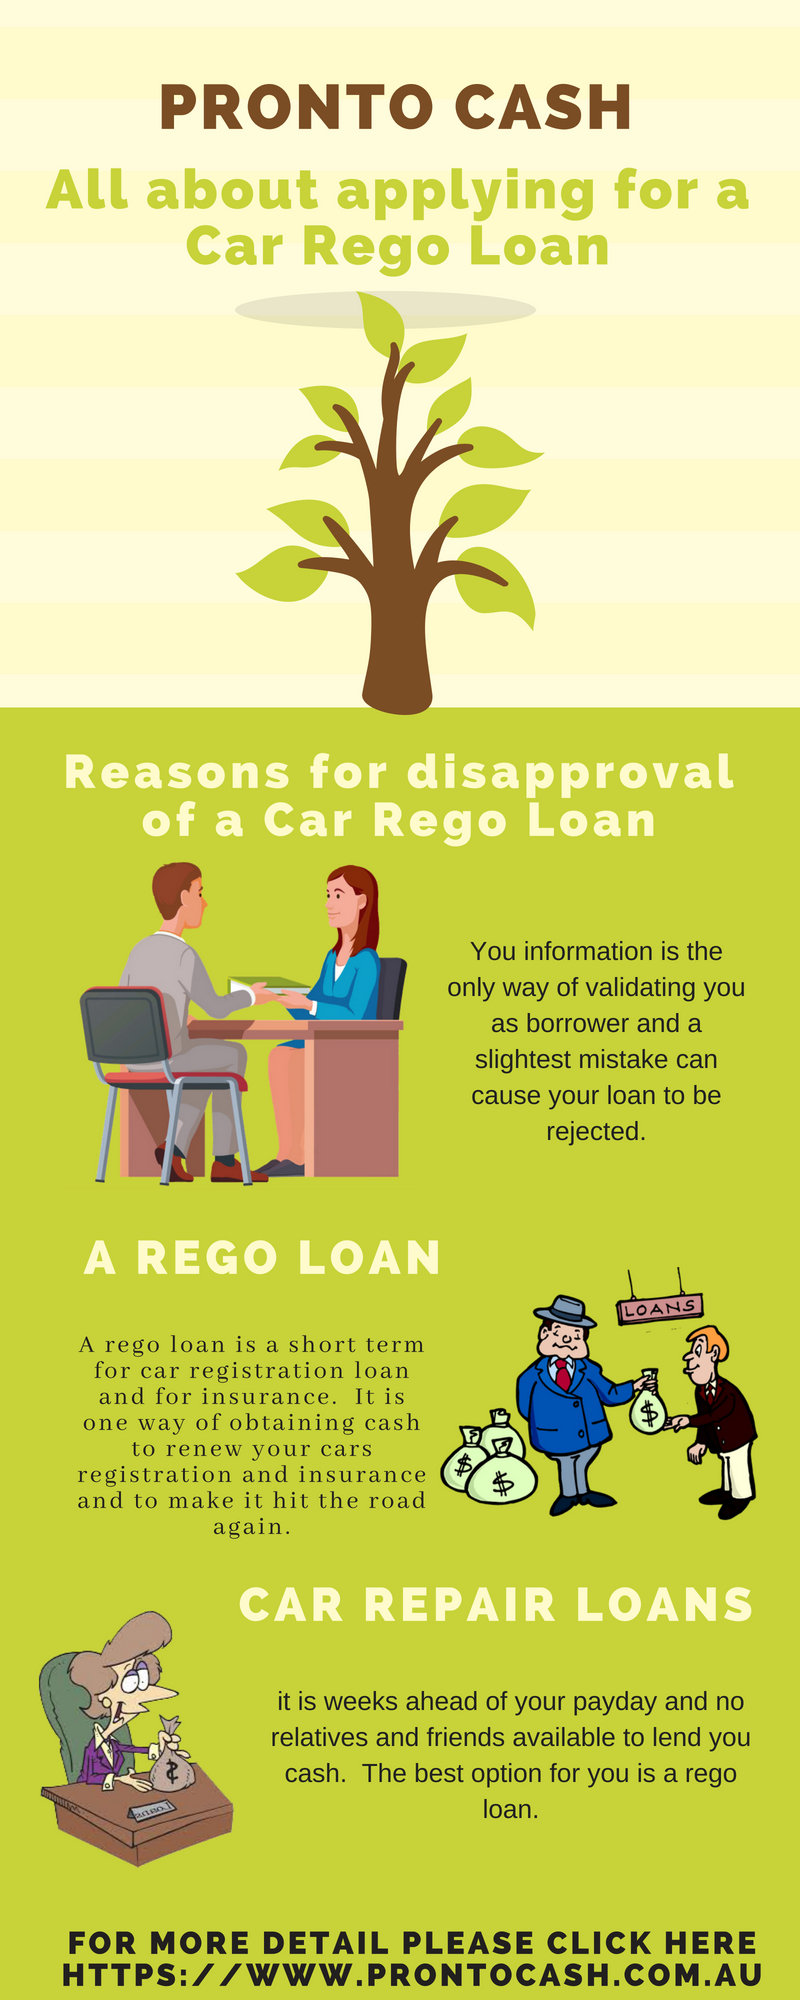 All about applying for a Car Rego Loan We process your simple online loan application super-fast so that you know exactly where you stand asap. https://www.prontocash.com.au

 by ProntoCash